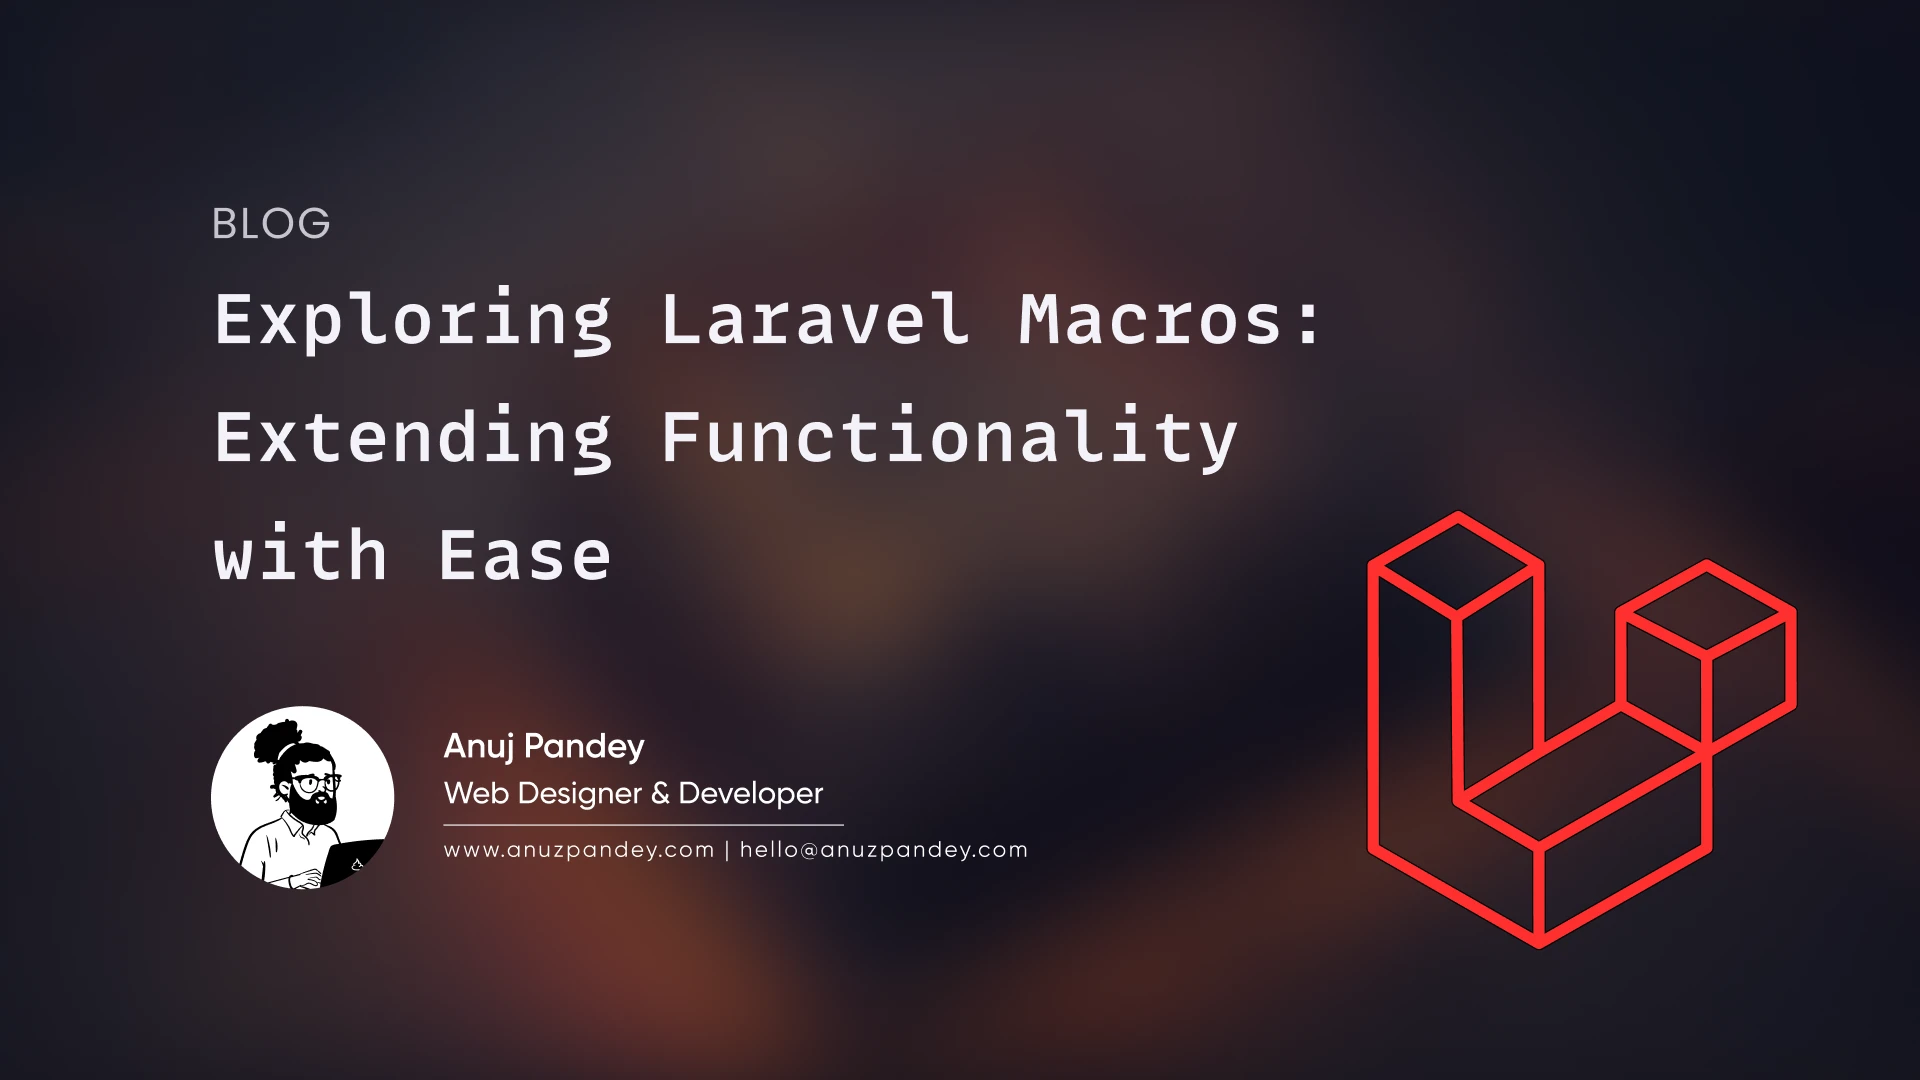 Exploring Laravel Macros: Extending Functionality with Ease